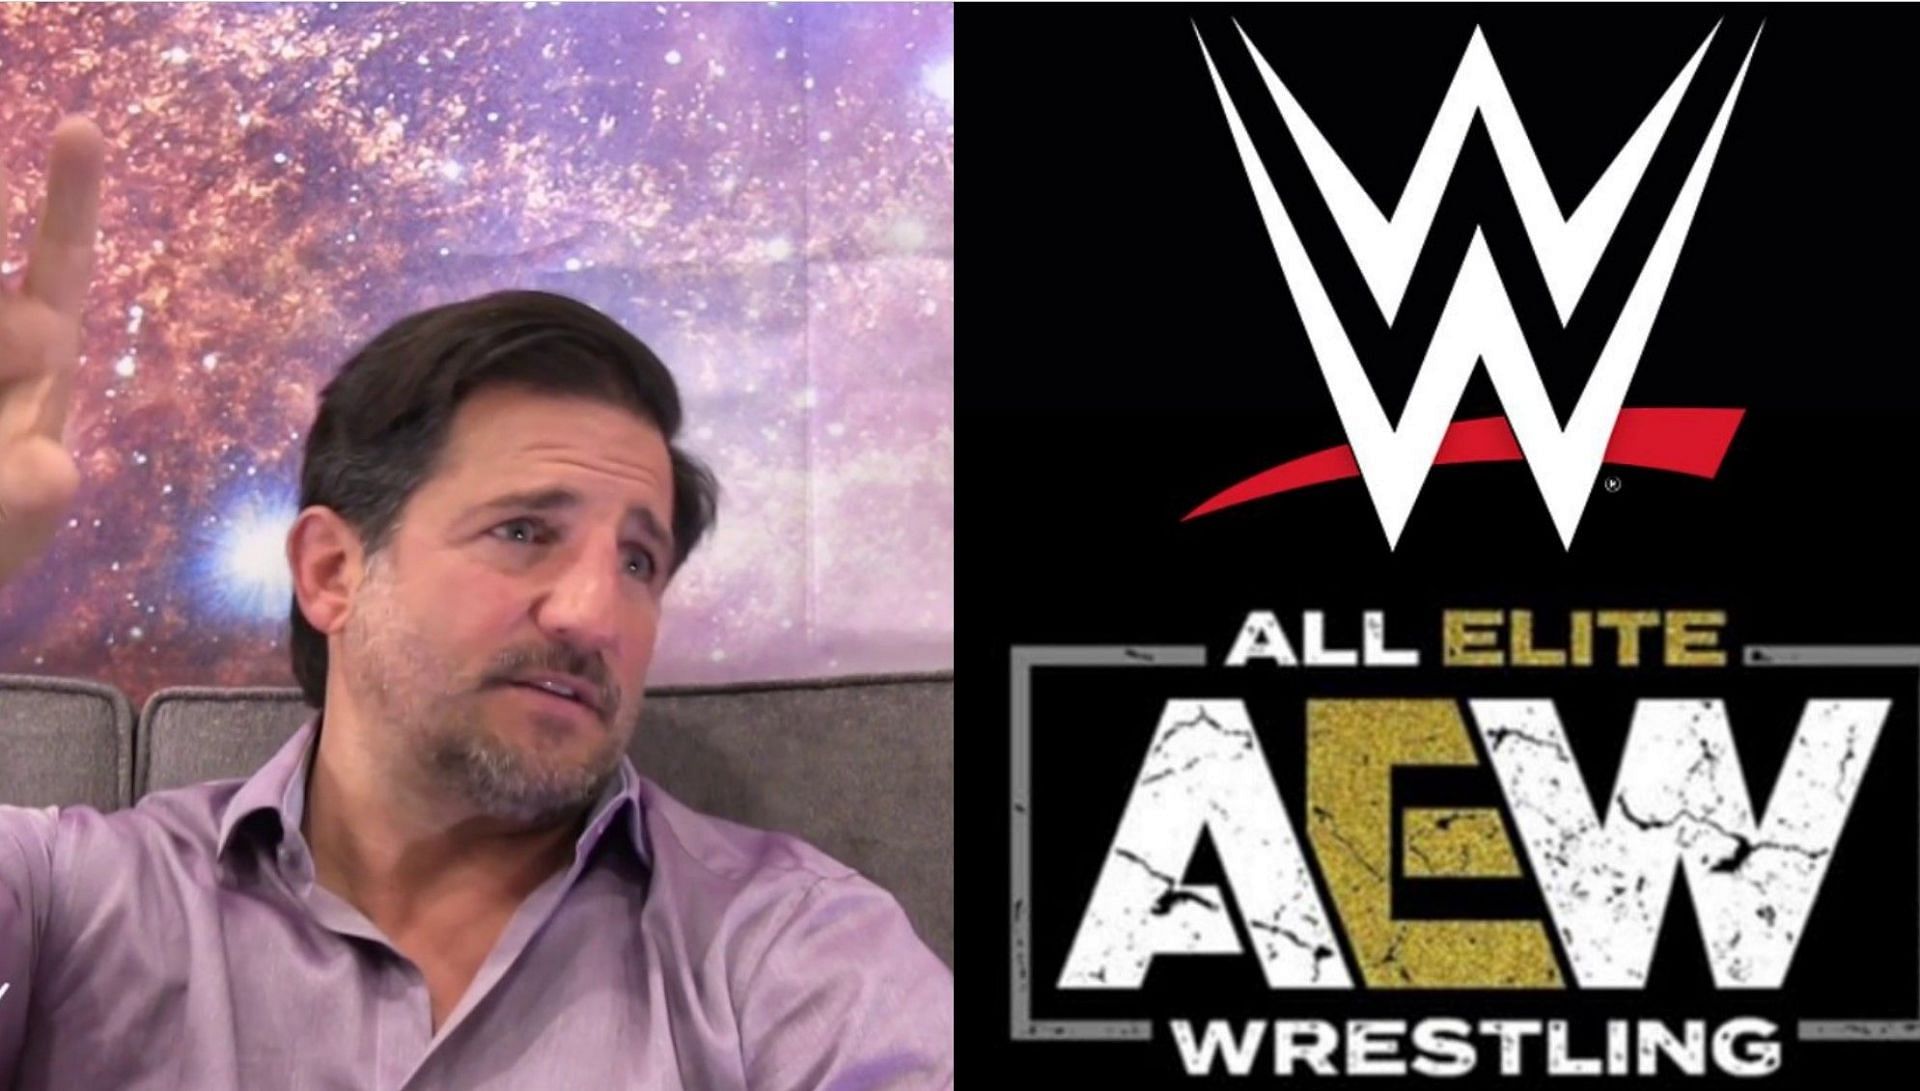 Disco Inferno has offered AEW a new strategy